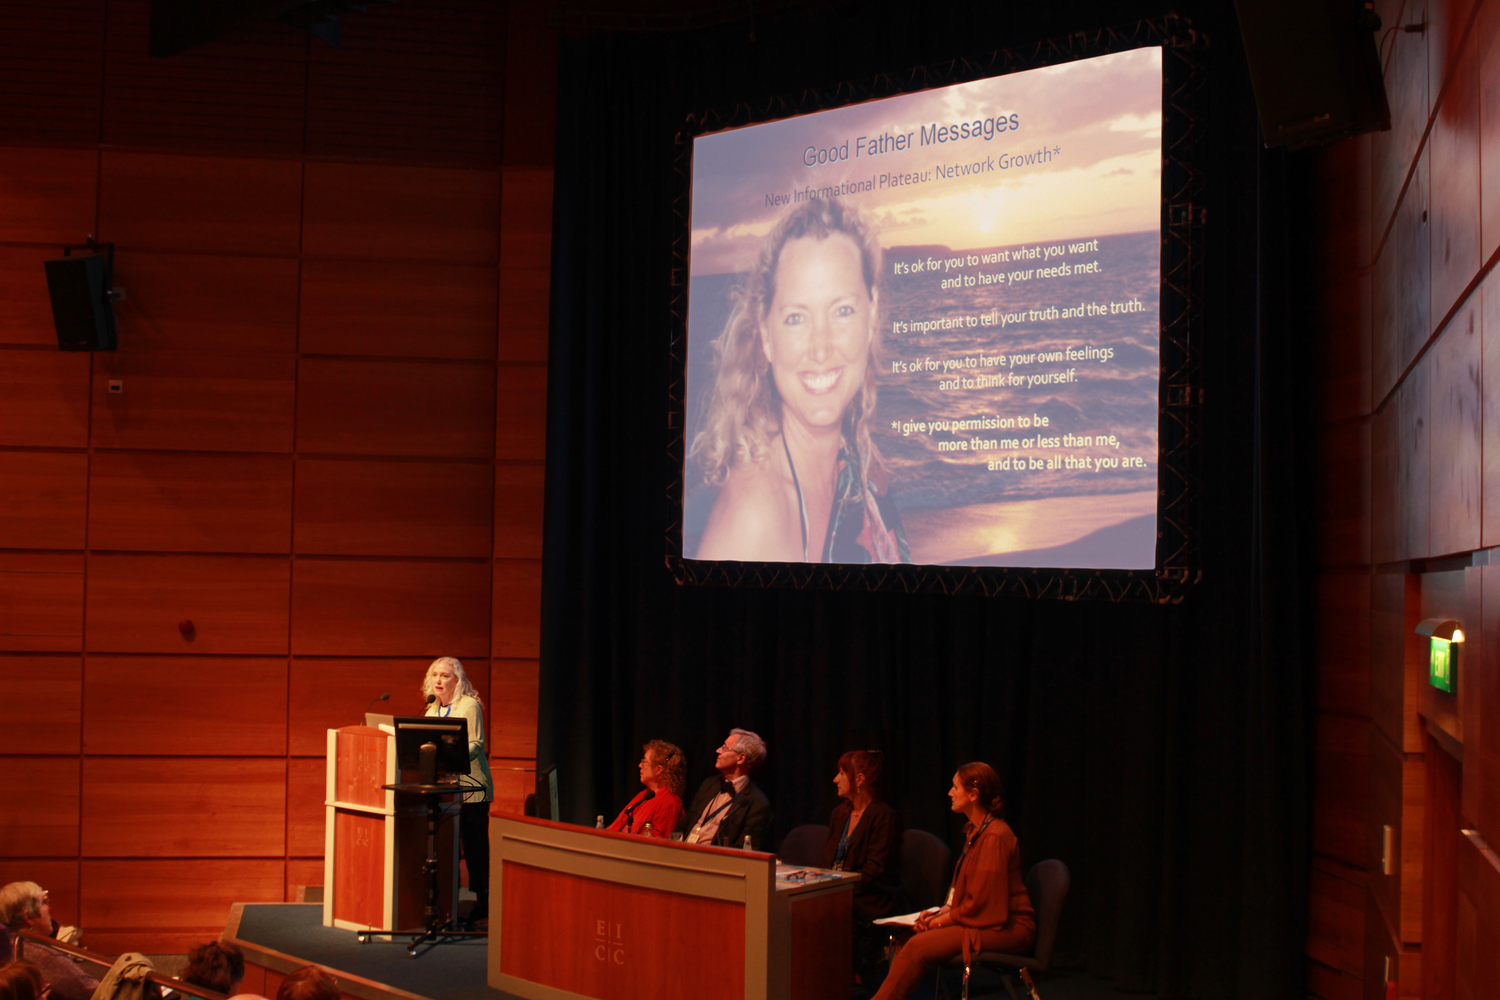 Gallery Photo of Presenting at the Edinburgh International Conference Center - 2014